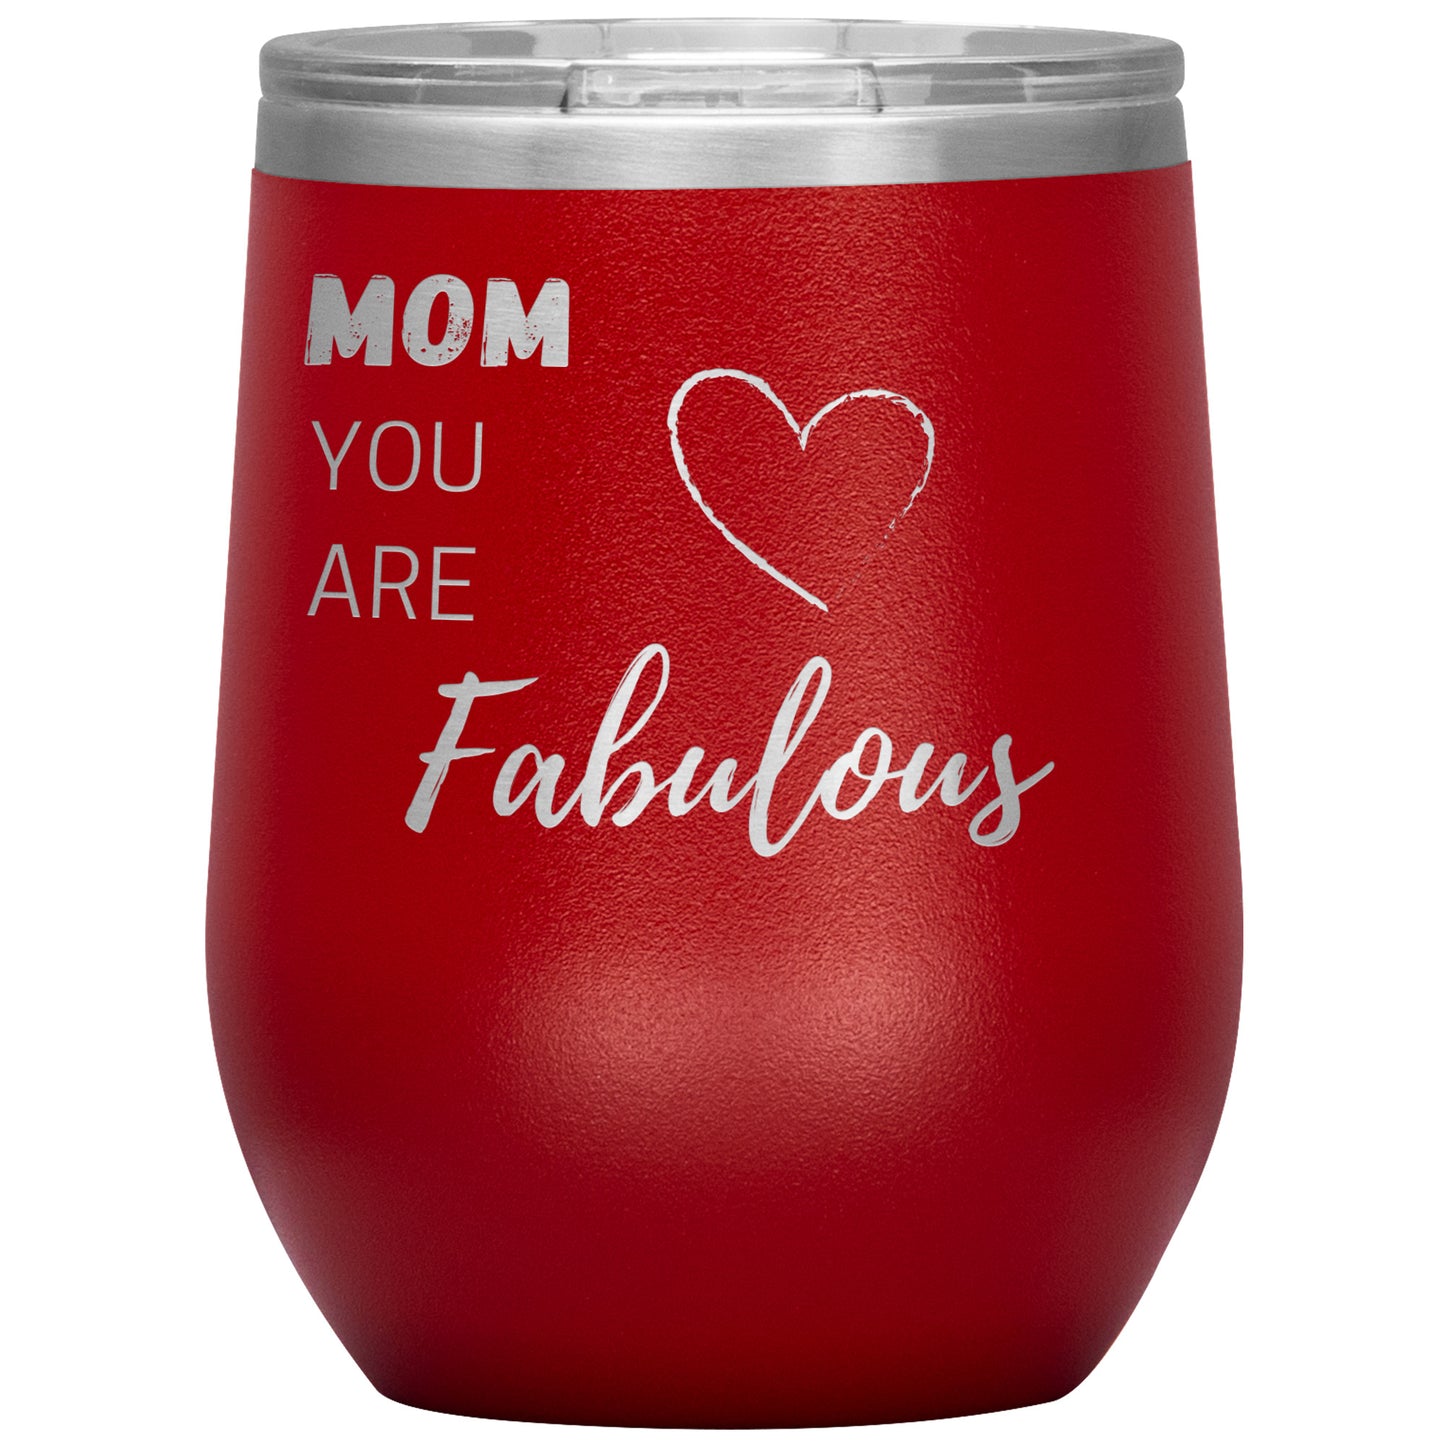 Mom, You Are Fabulous